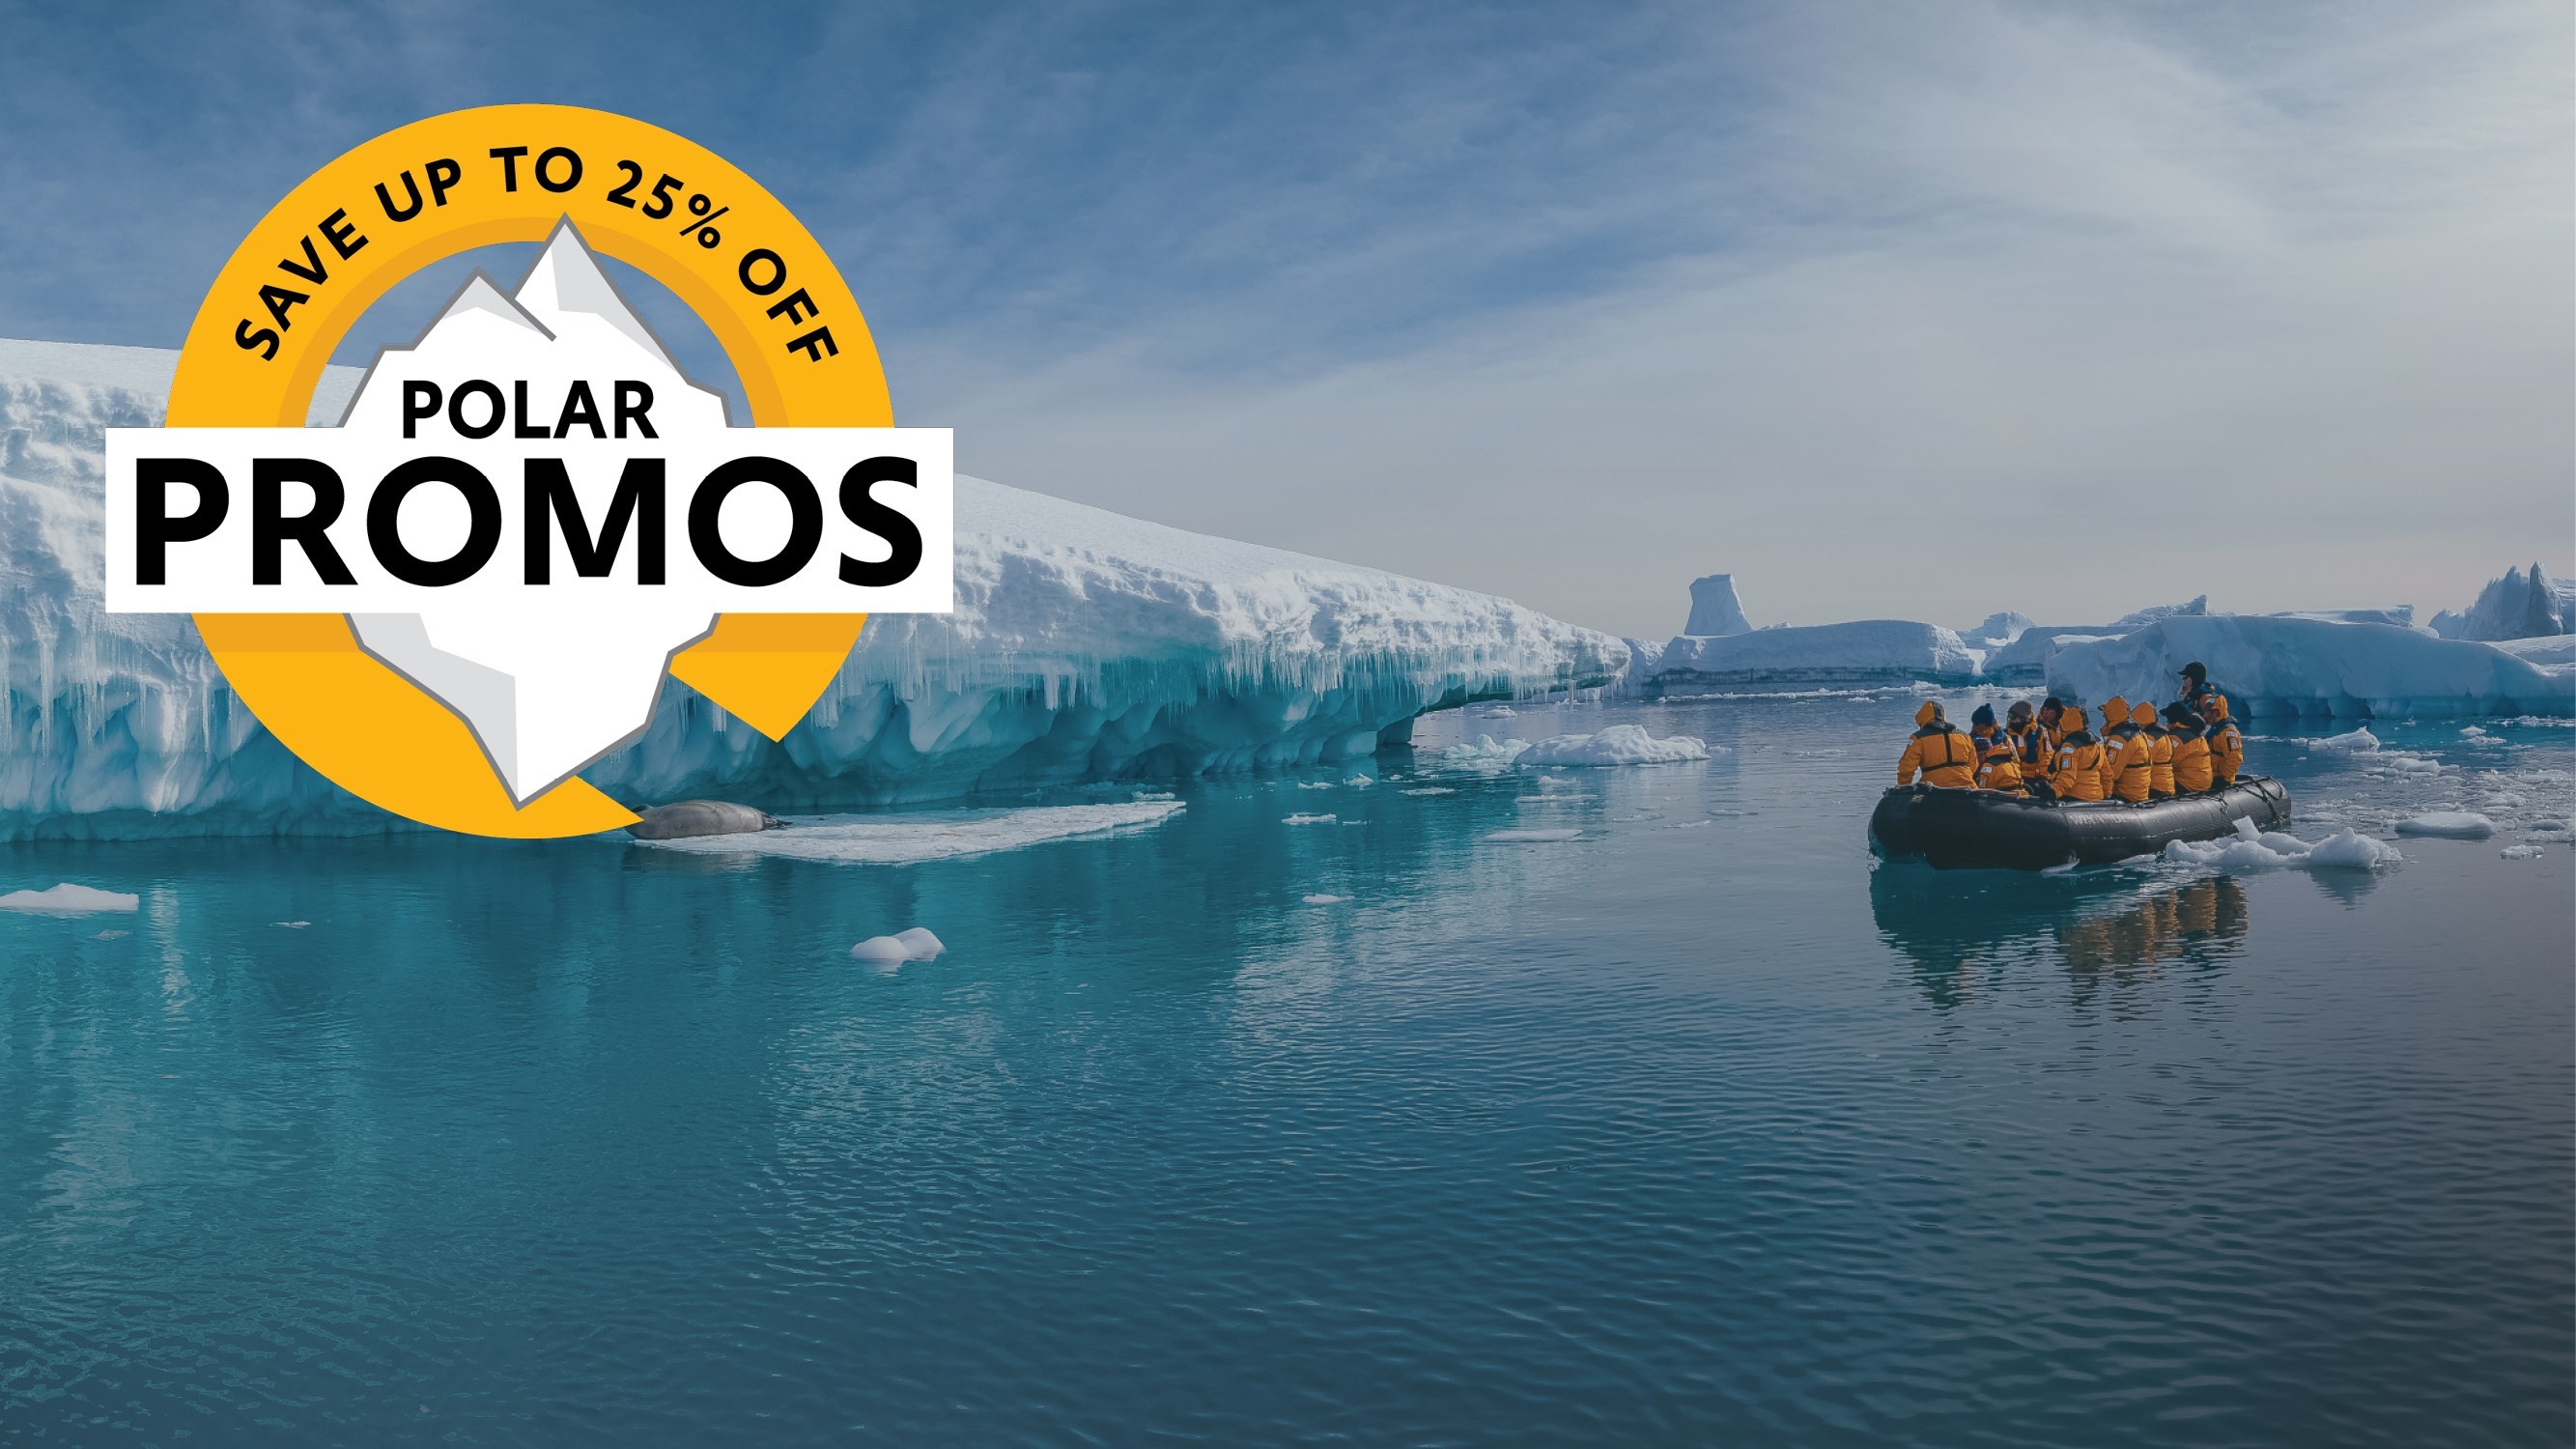 Quark Expeditions' 2022 Summer Promo. 25% discount on select Arctic and Antarctic Voyages - Credit: David Merron and Quark Expeditions (Image - July 2022)